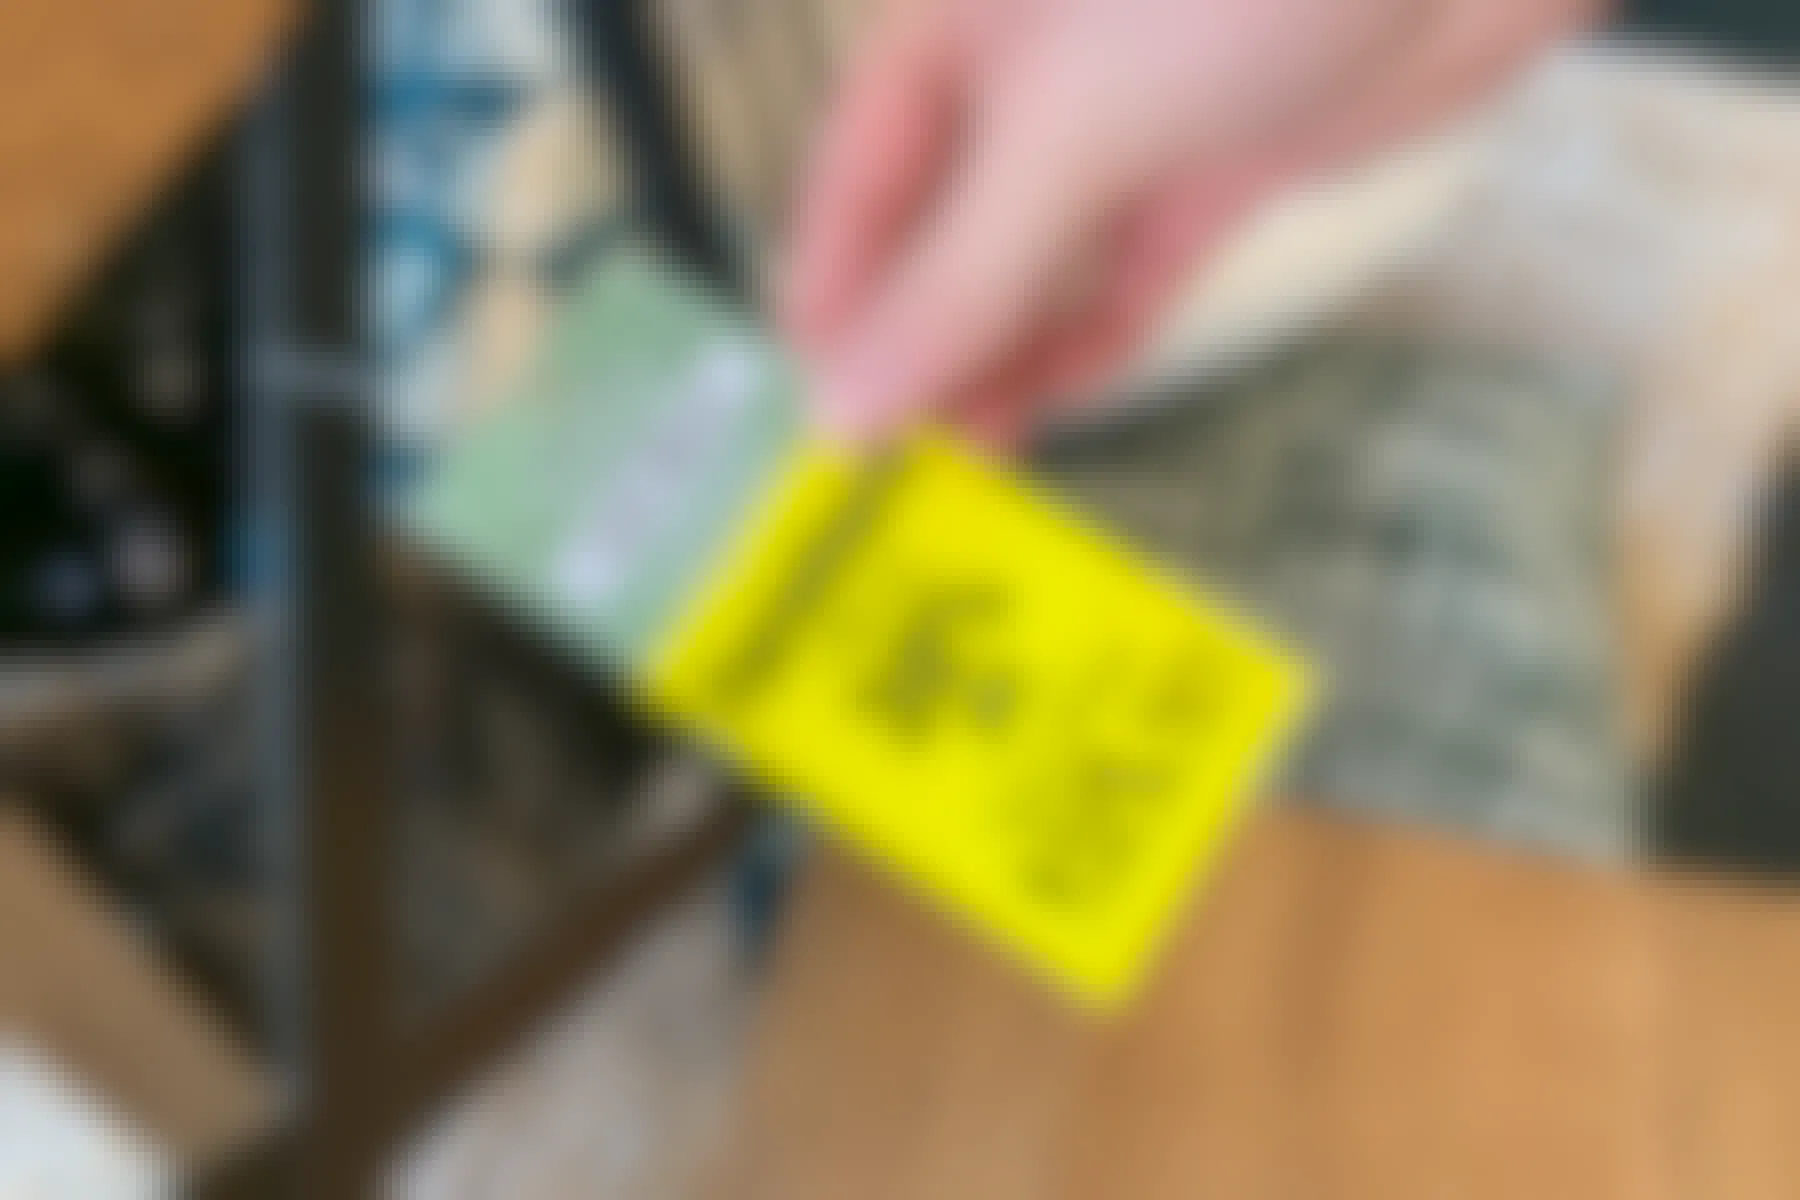 A yellow furniture tag that reads "furniture alway 30% off".